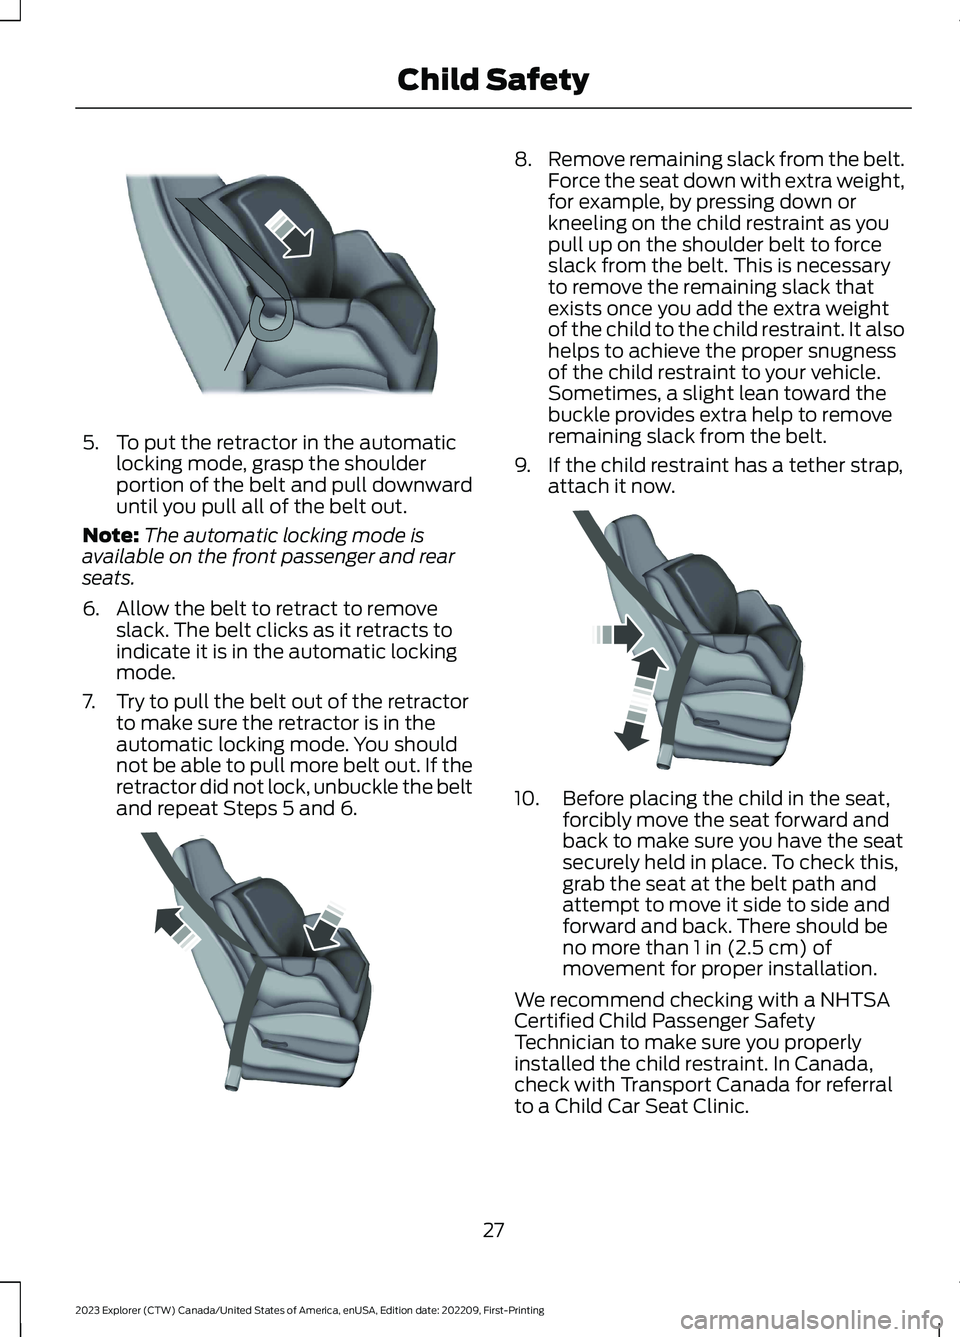 FORD EXPLORER 2023  Owners Manual 5.To put the retractor in the automaticlocking mode, grasp the shoulderportion of the belt and pull downwarduntil you pull all of the belt out.
Note:The automatic locking mode isavailable on the front